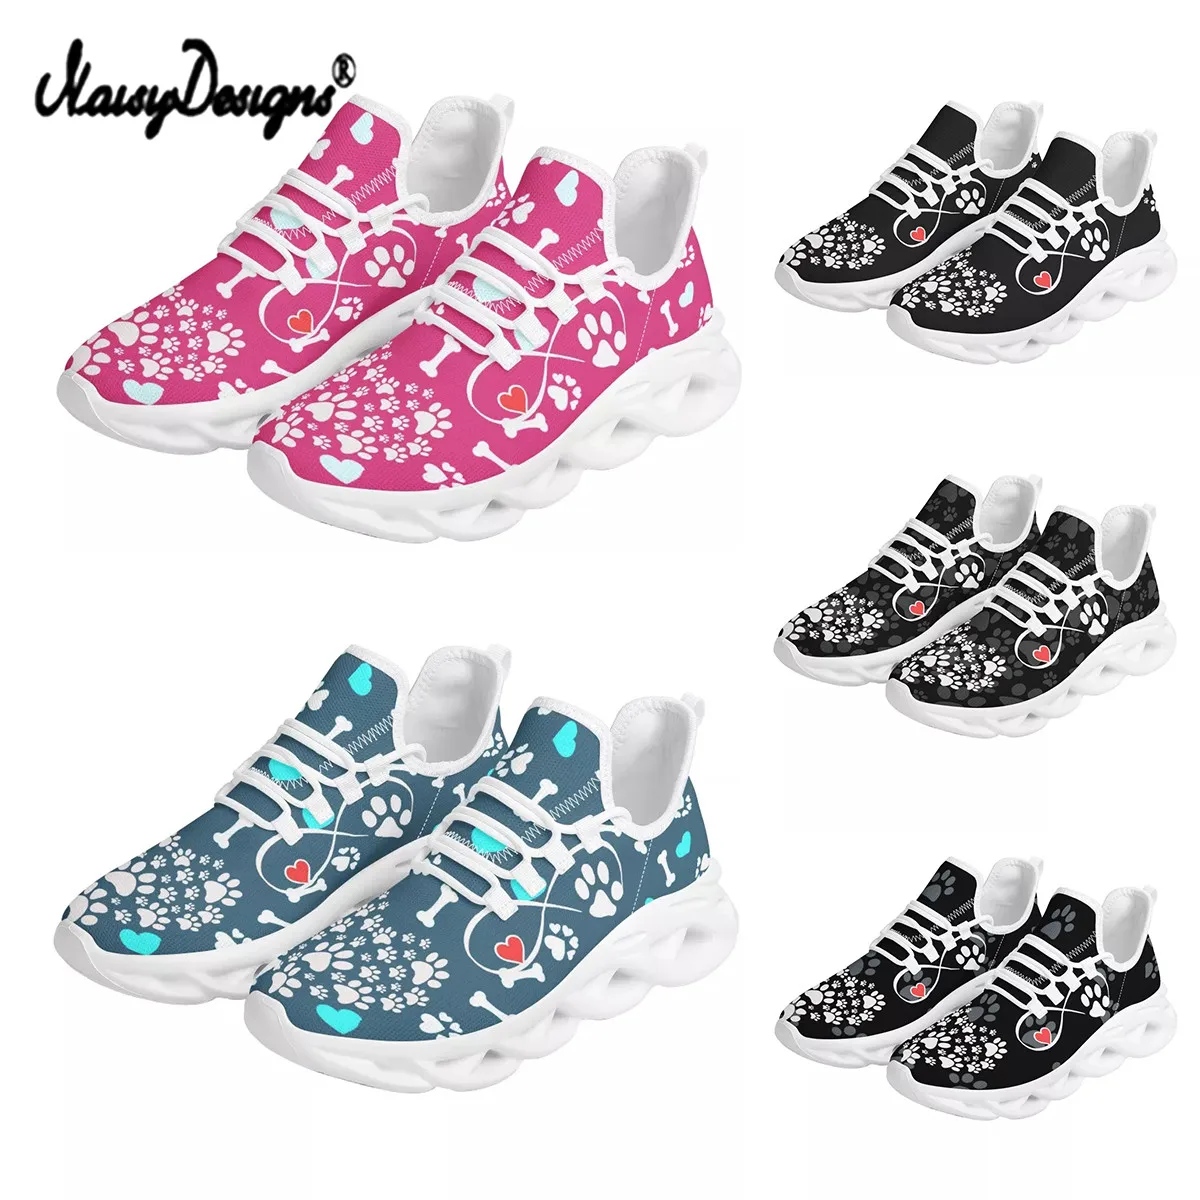 

Noisydesigns Summer Sneakers Women 2021 Cute Cat/dog Paw Prints Breathable Mesh Women's Casual Shoes Comfortable Walking Shoe